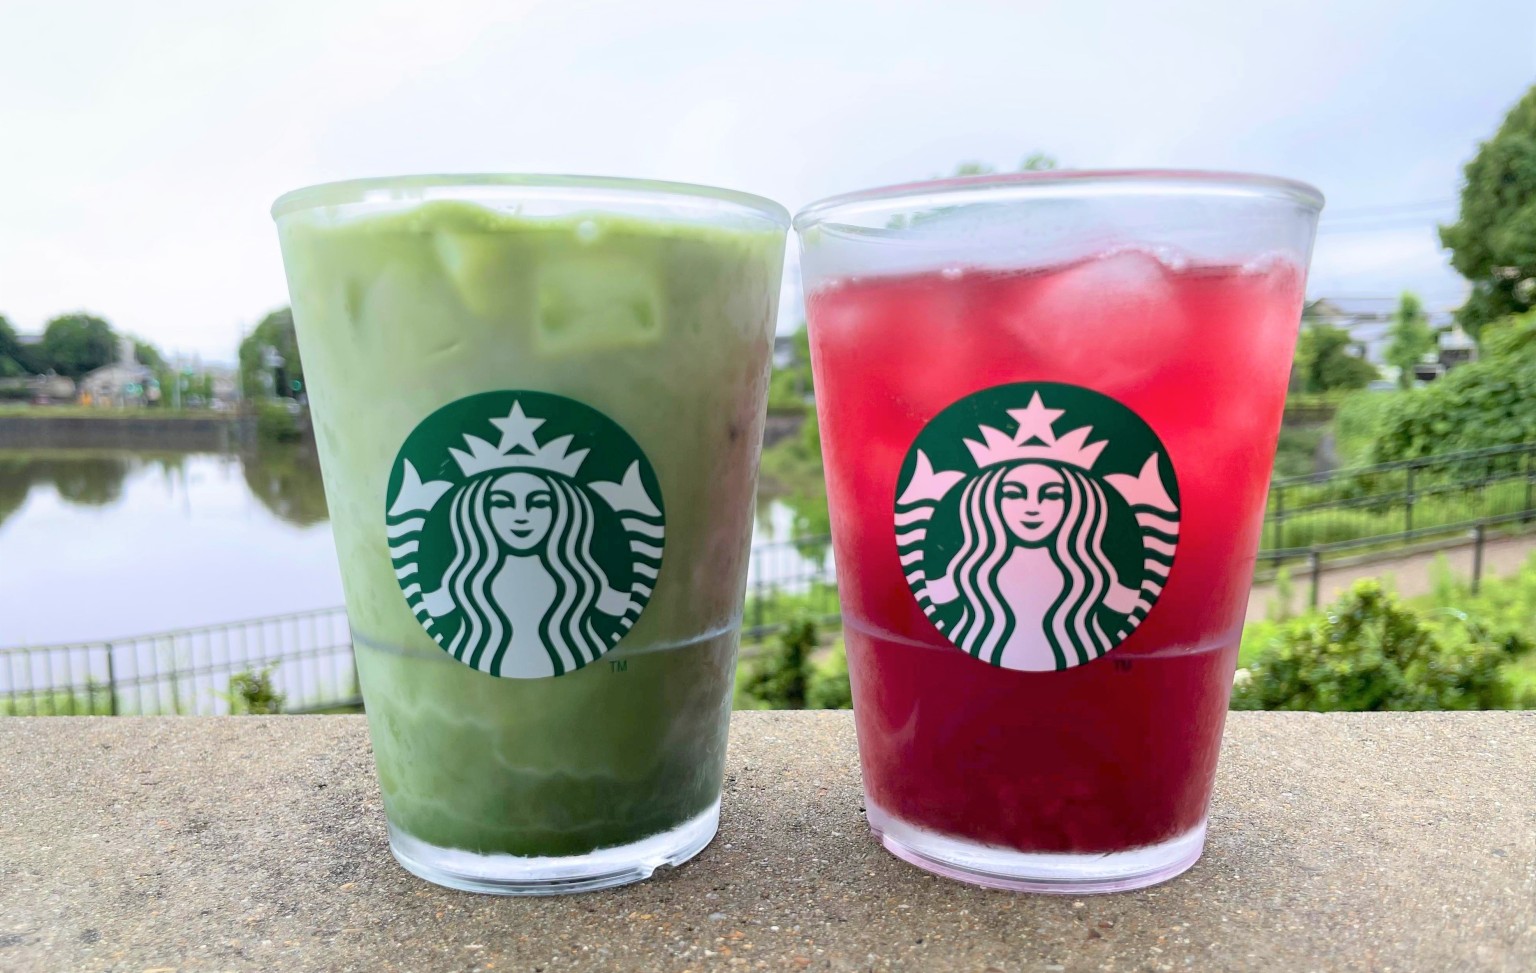 Starbucks Japan’s new summer drinks deliver all the goodness of Matcha and Youthberry